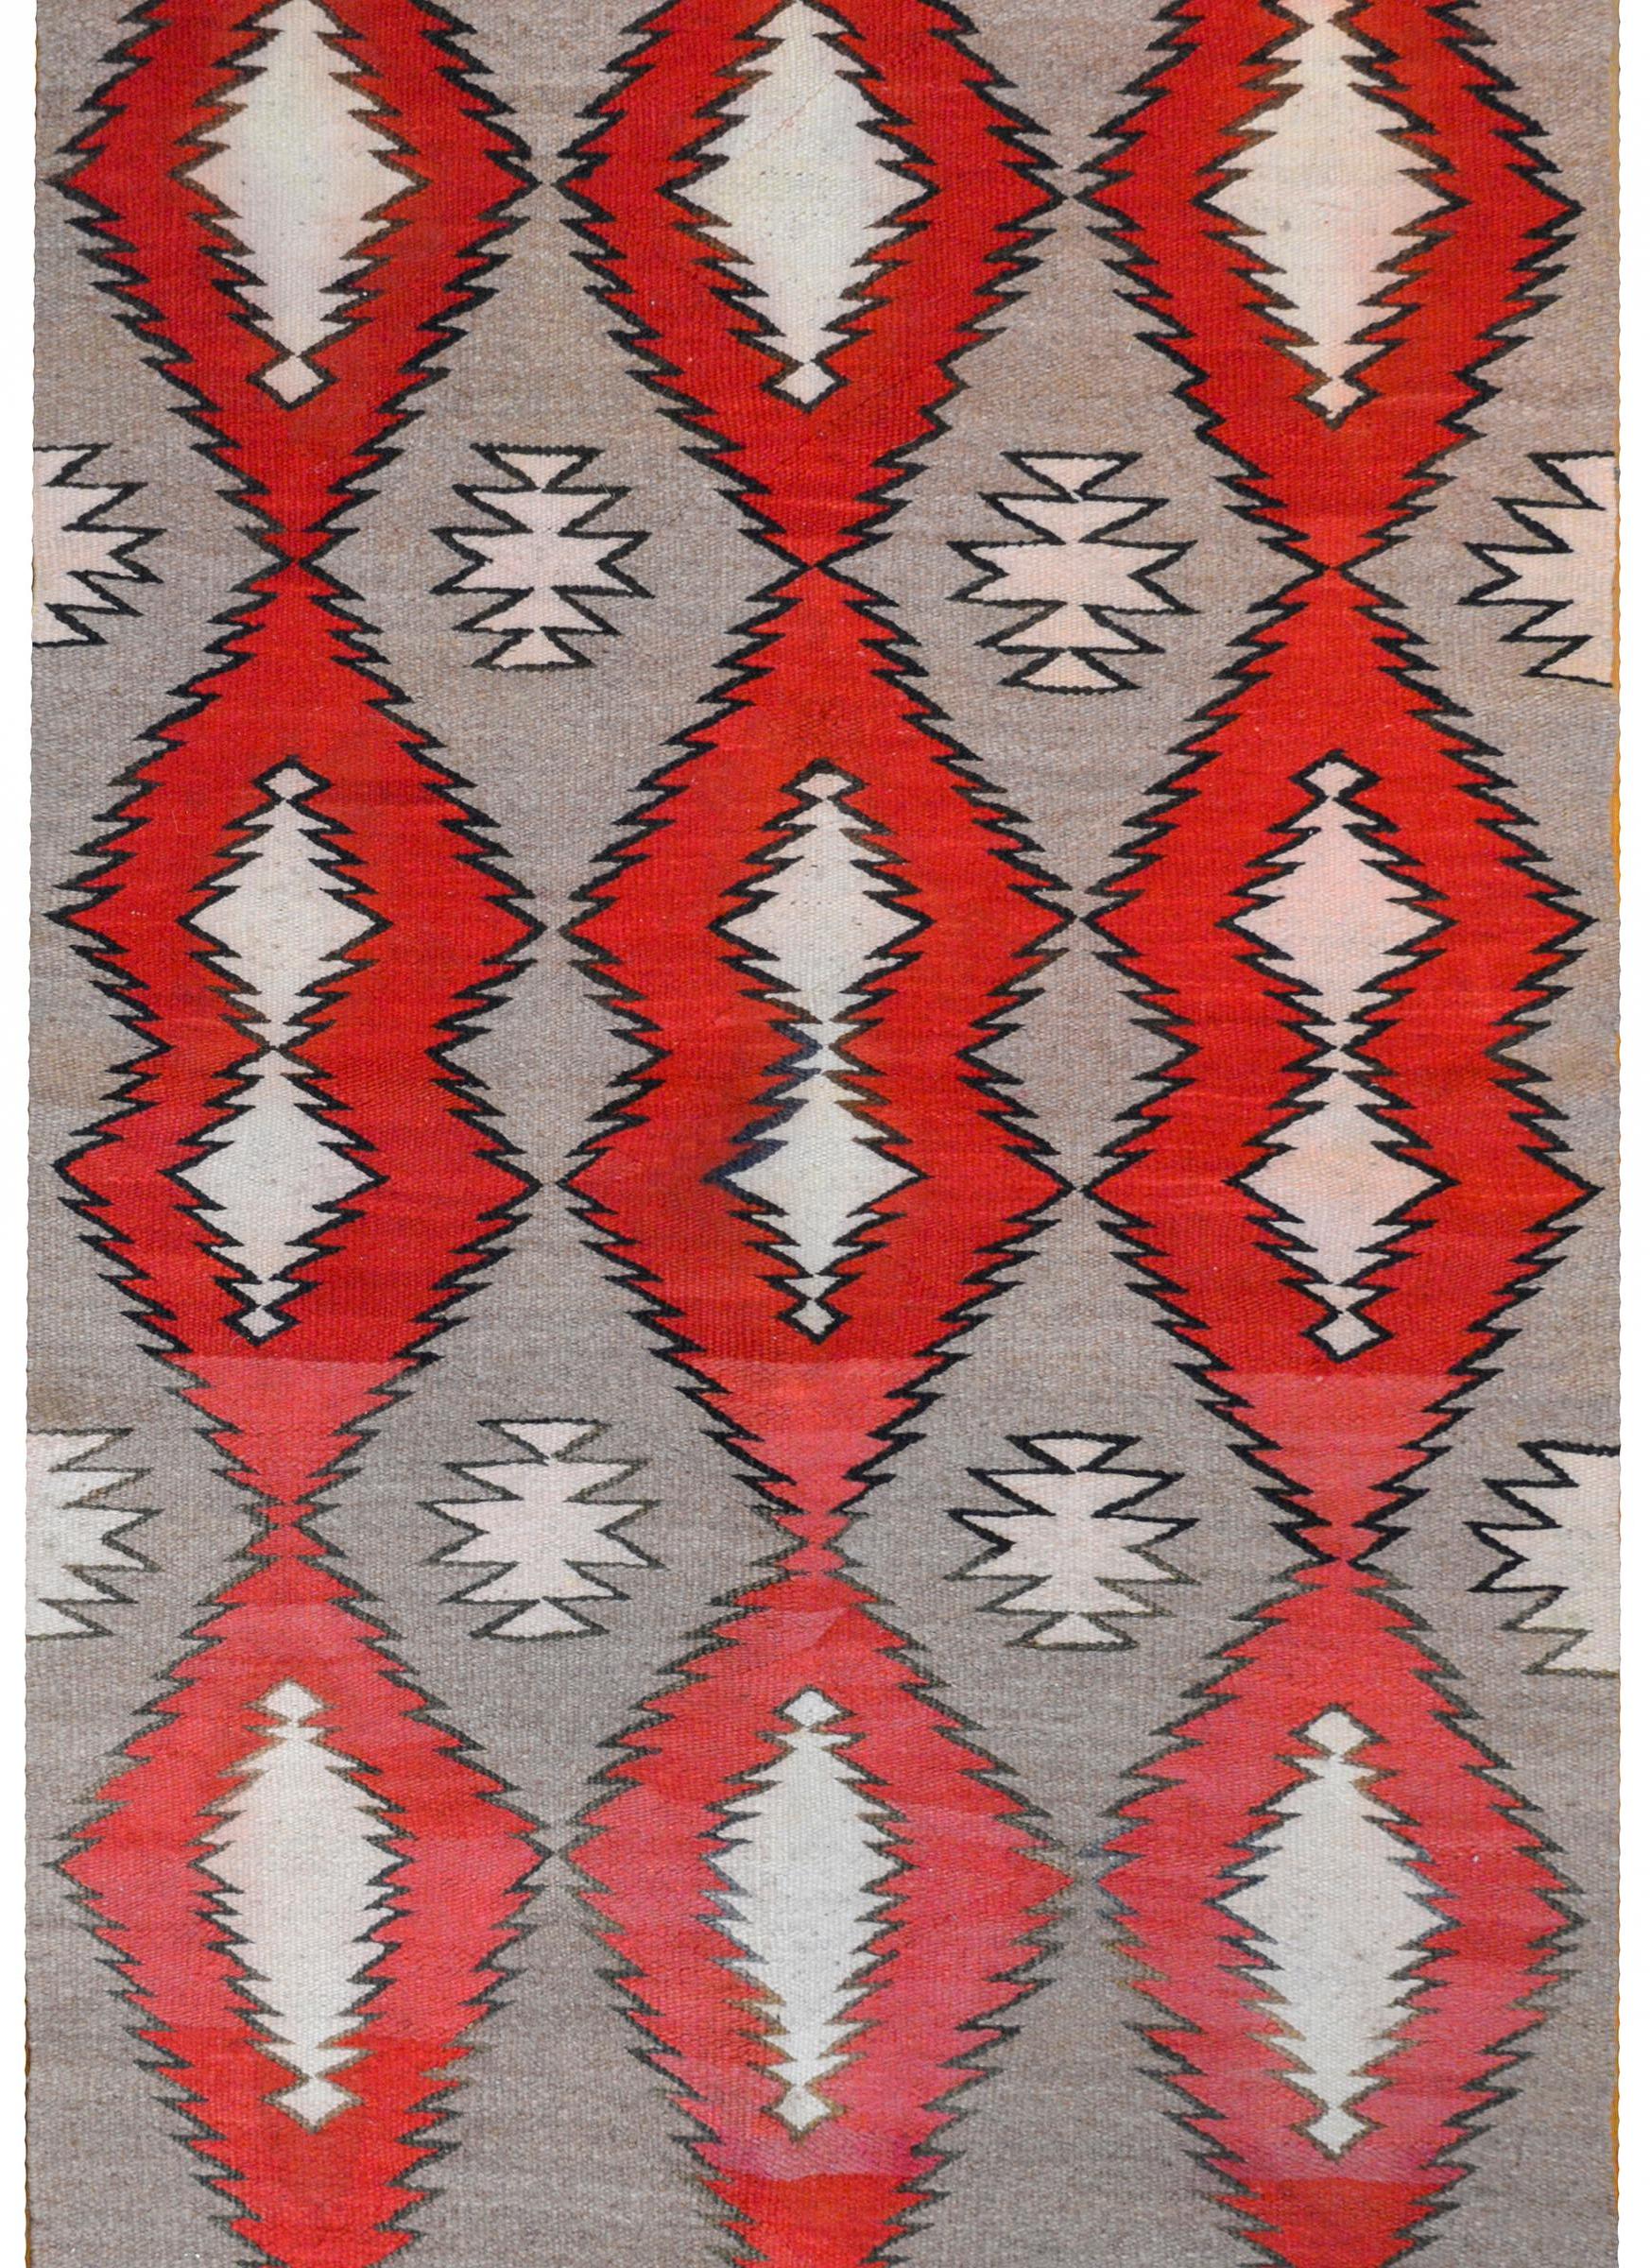 A mesmerizing early 20th century Navajo rug with an all-over pattern woven of abrash crimson and gray diamonds with zigzag edges giving a dizzying appearance.